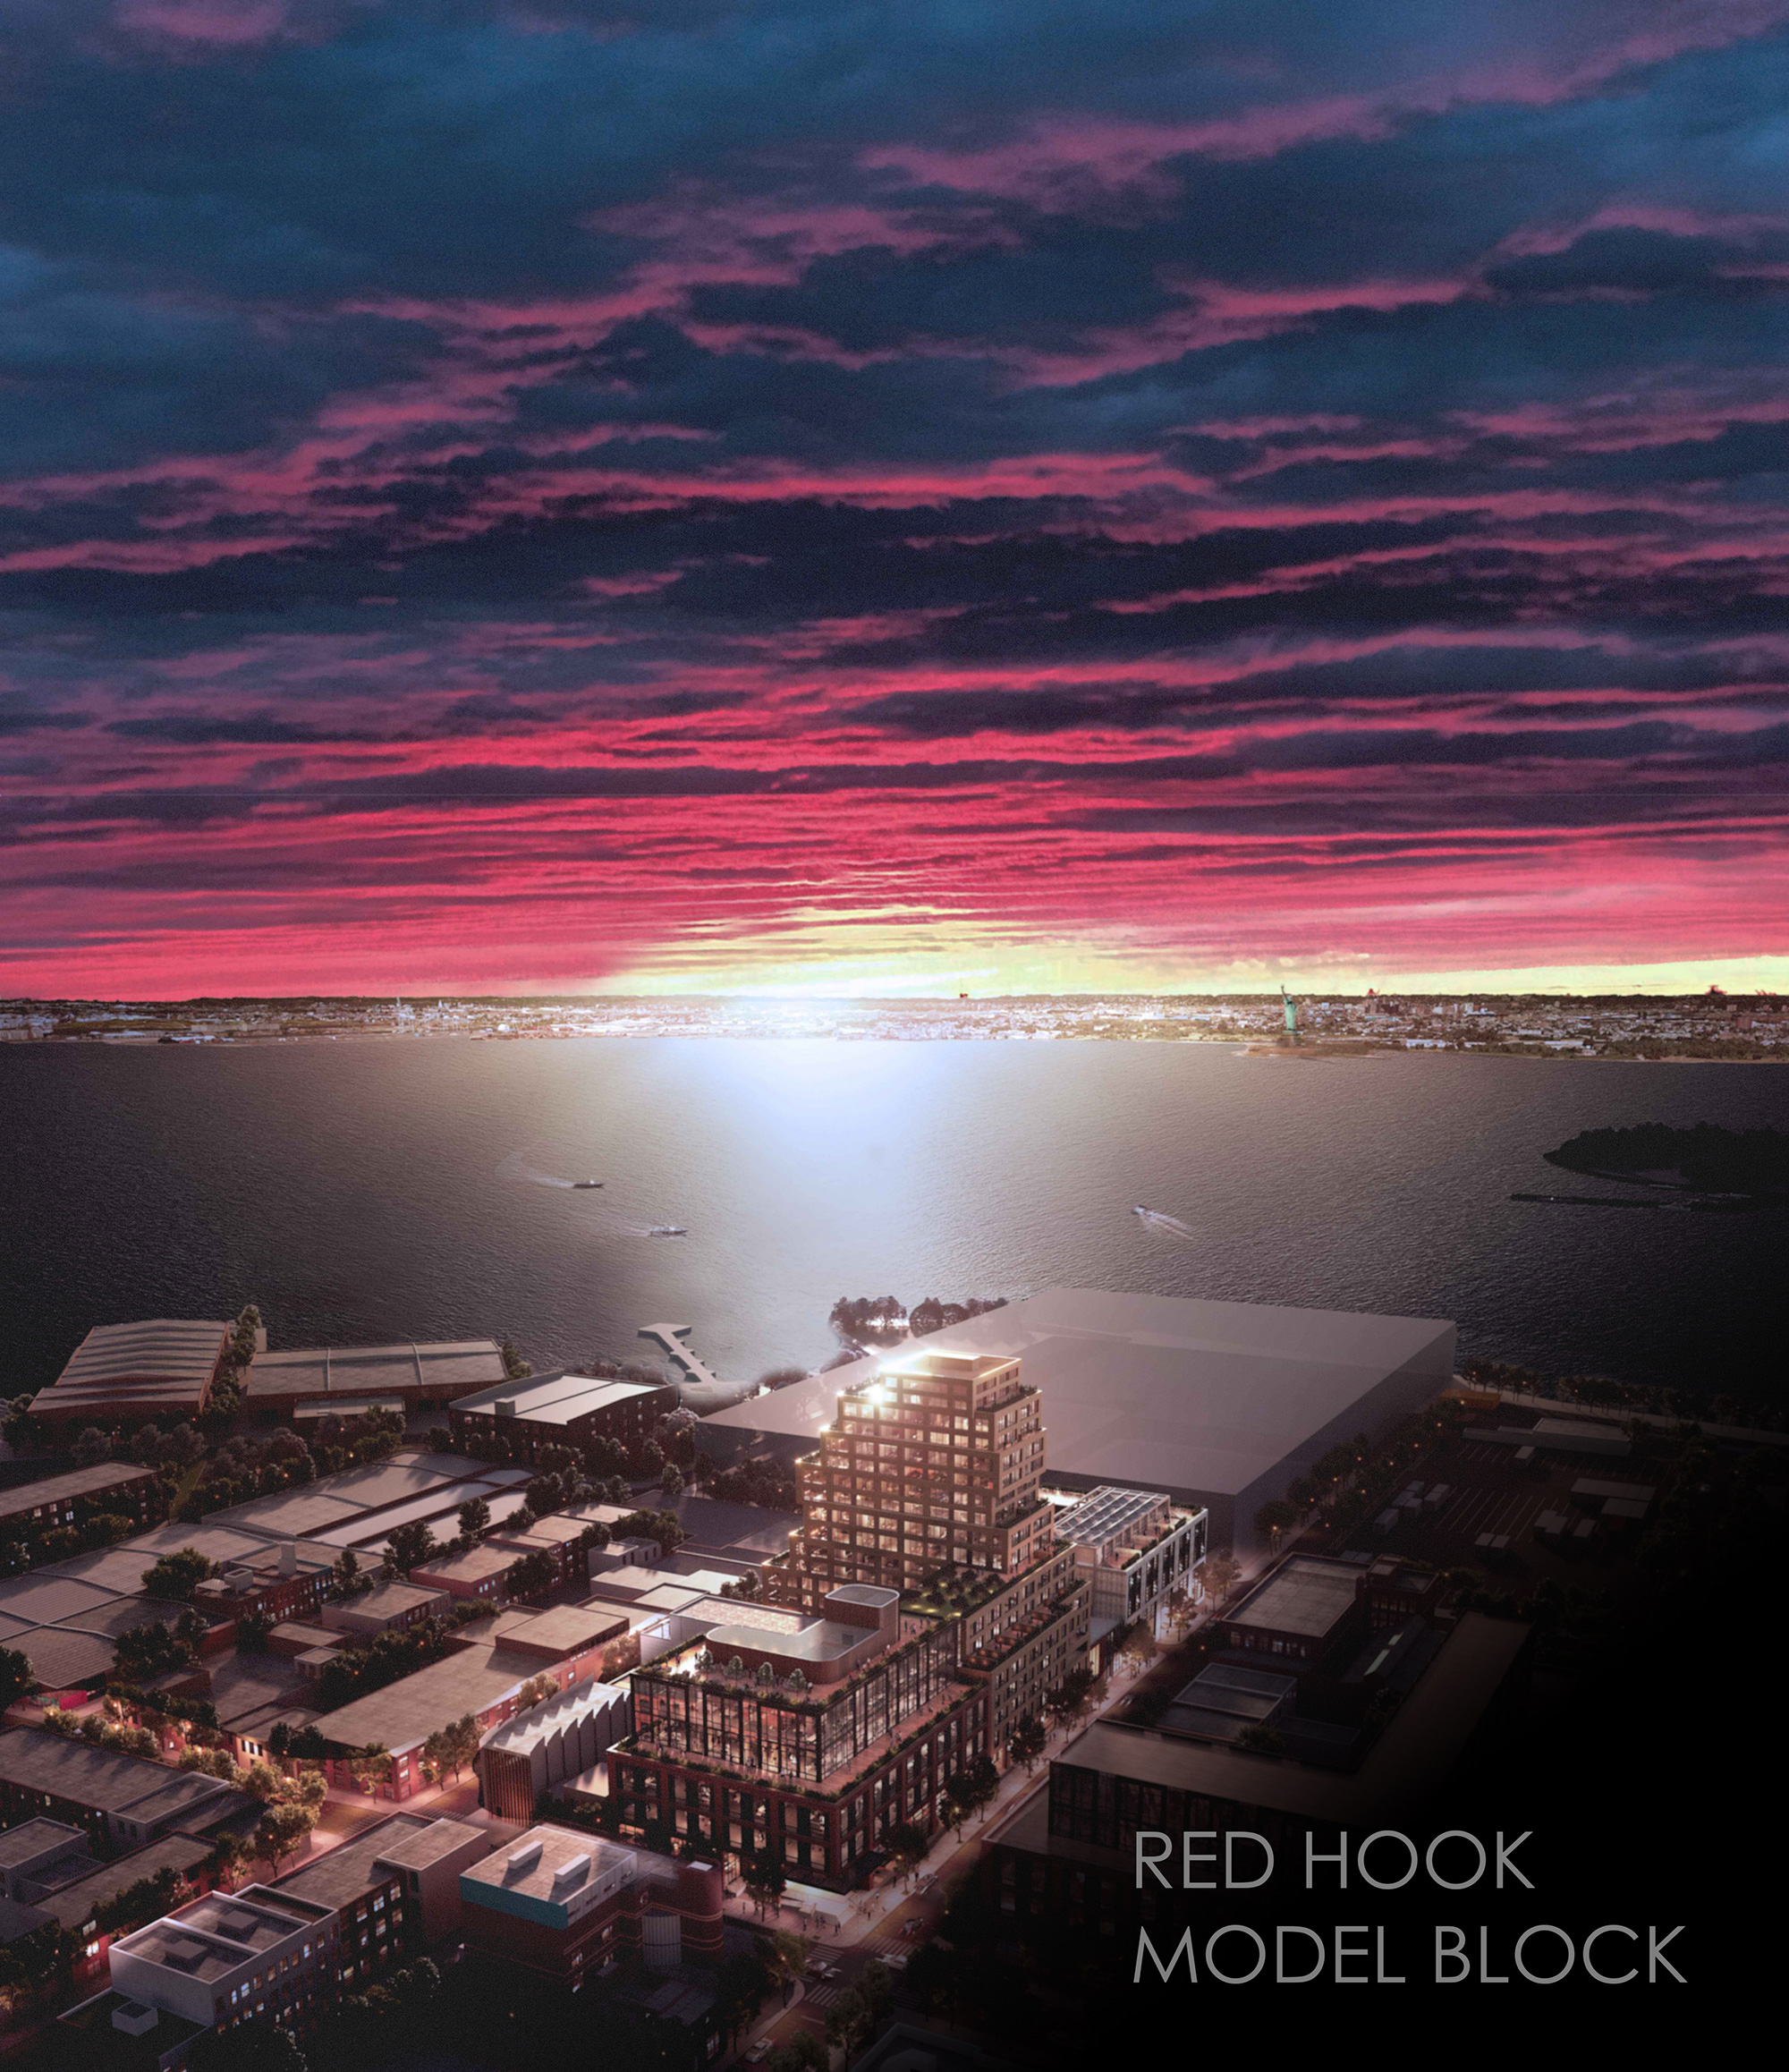 model block, a mixed-use development in red hook, under a sunset